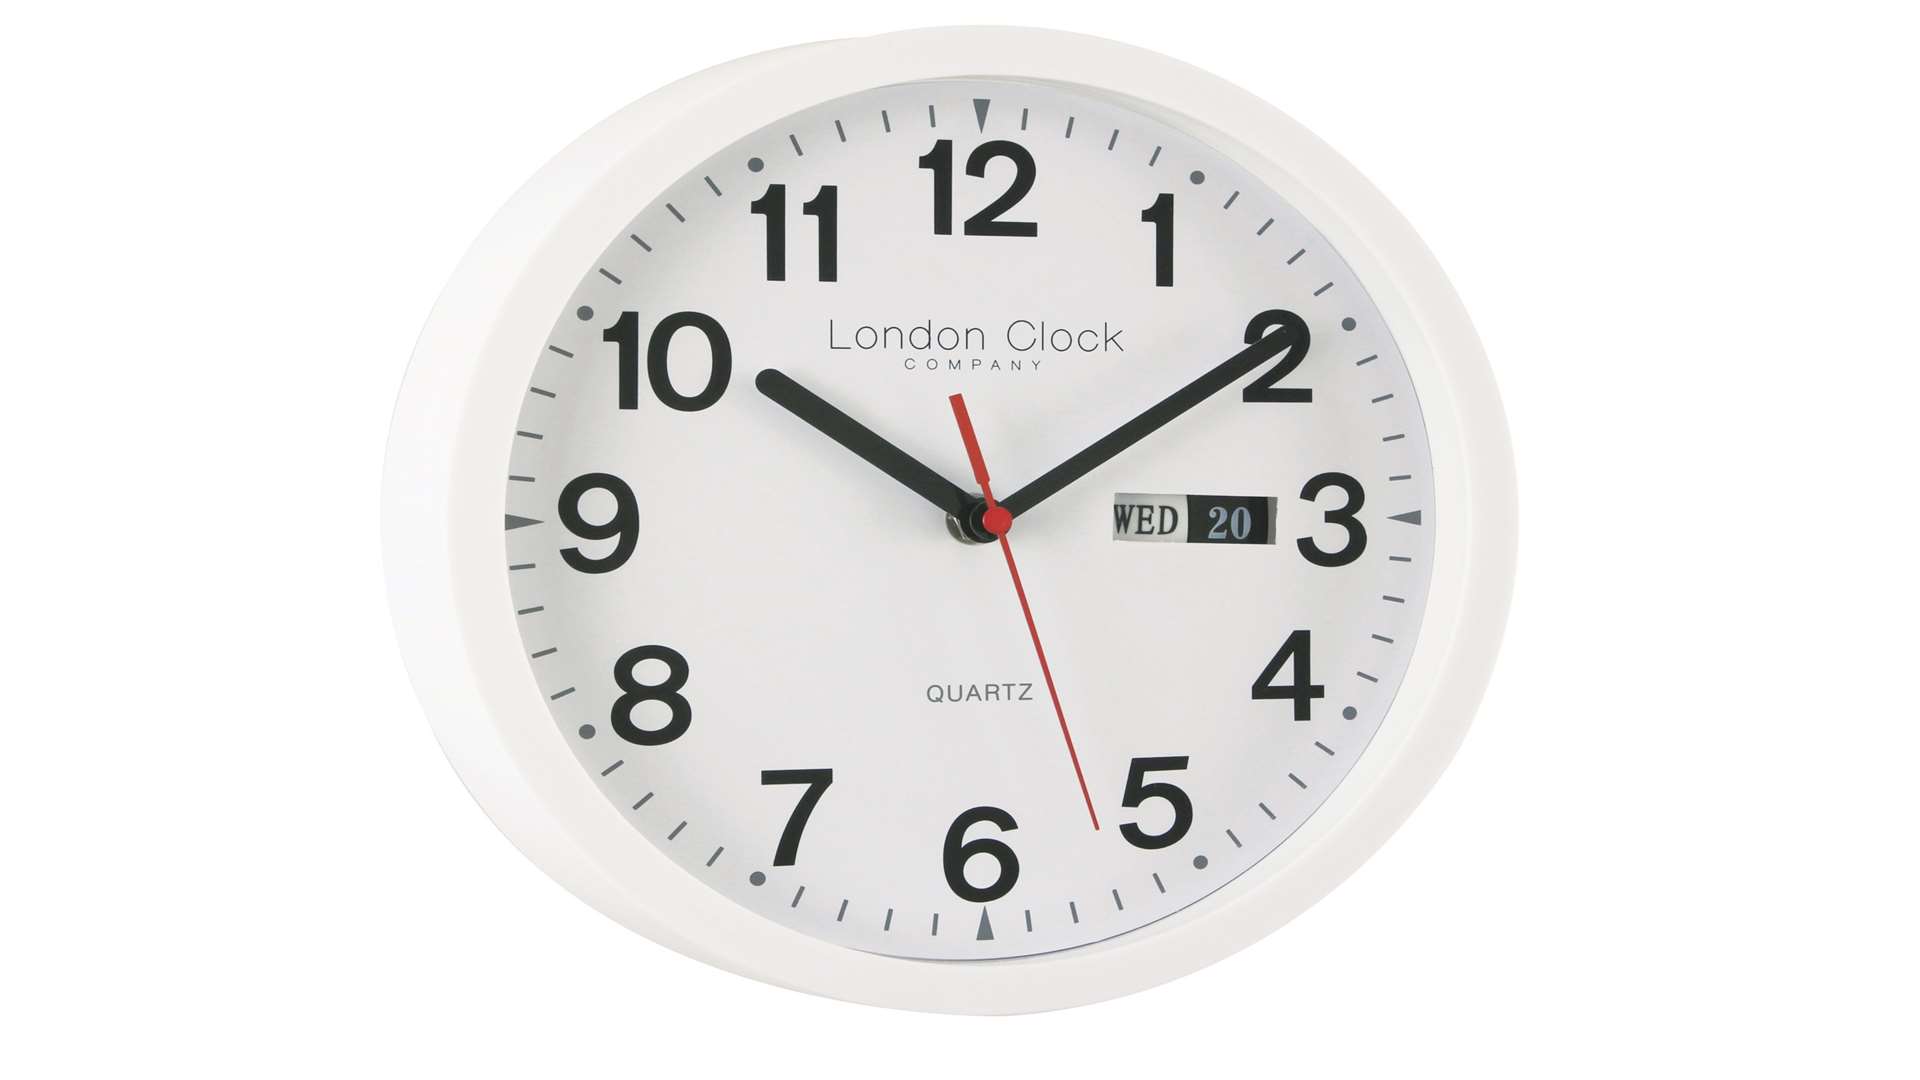 LC Designs is behind the London Clock Company brand